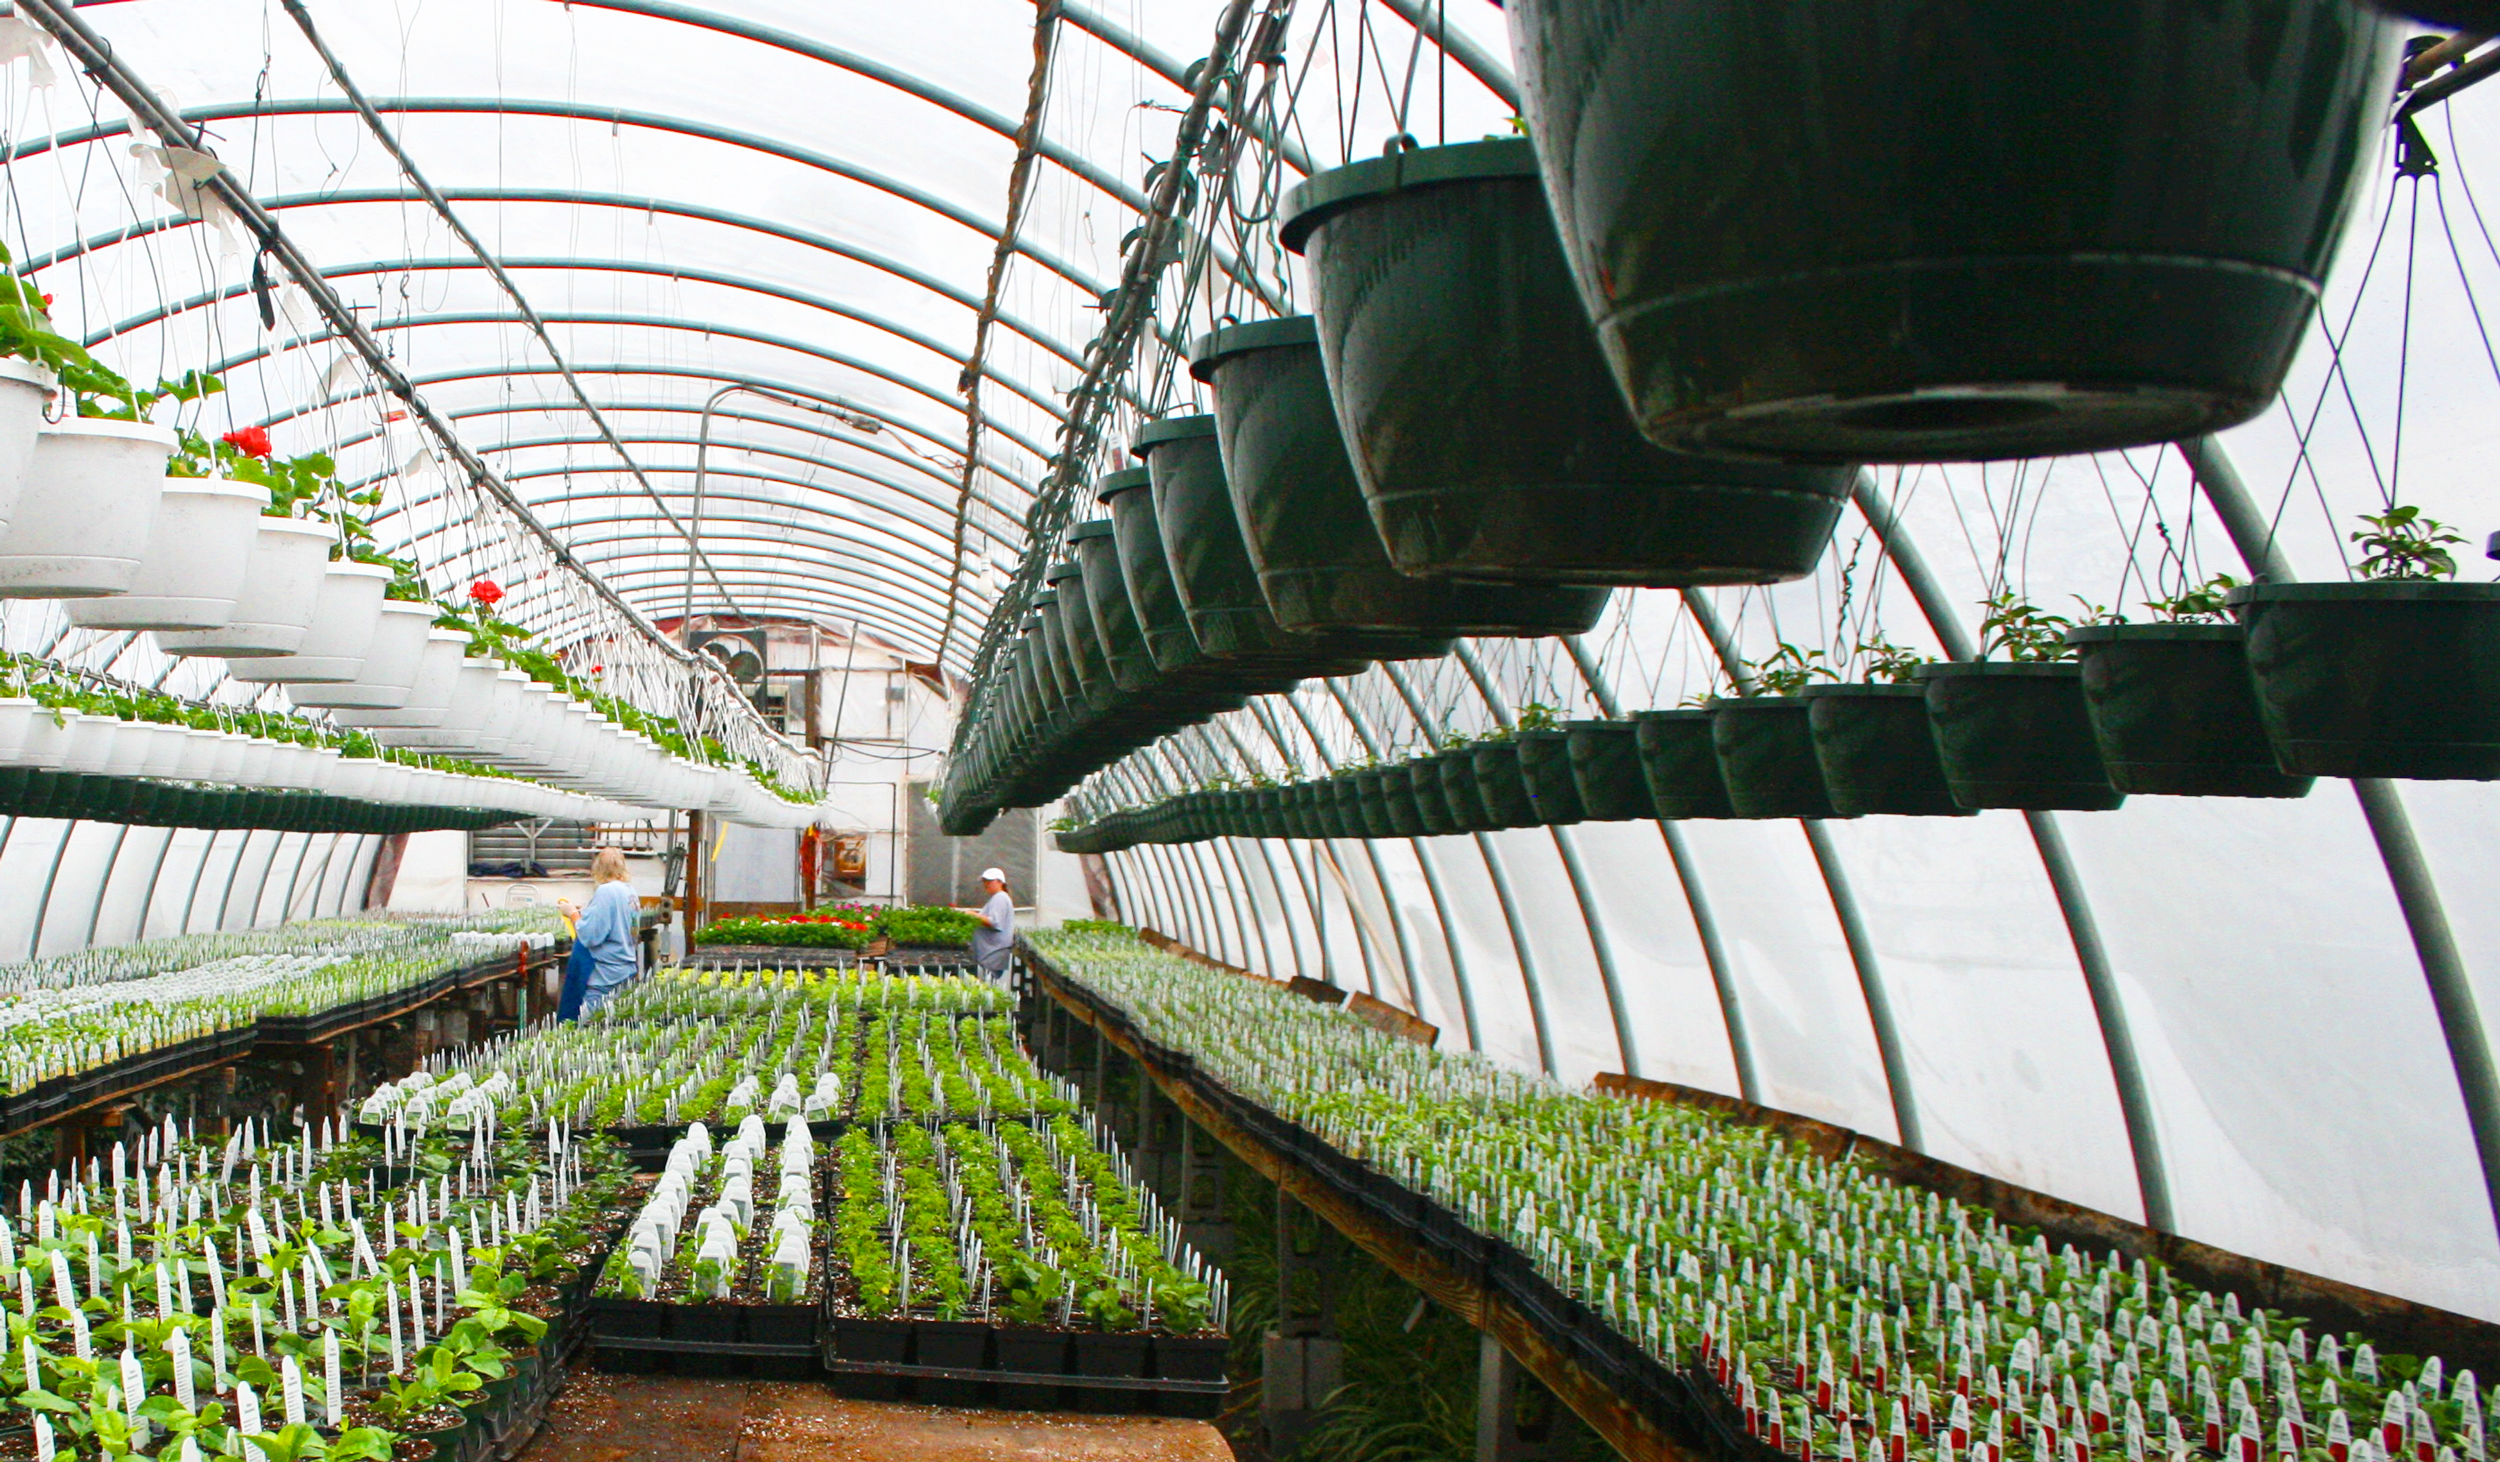 Inside of greenhouse with seedlings and workers